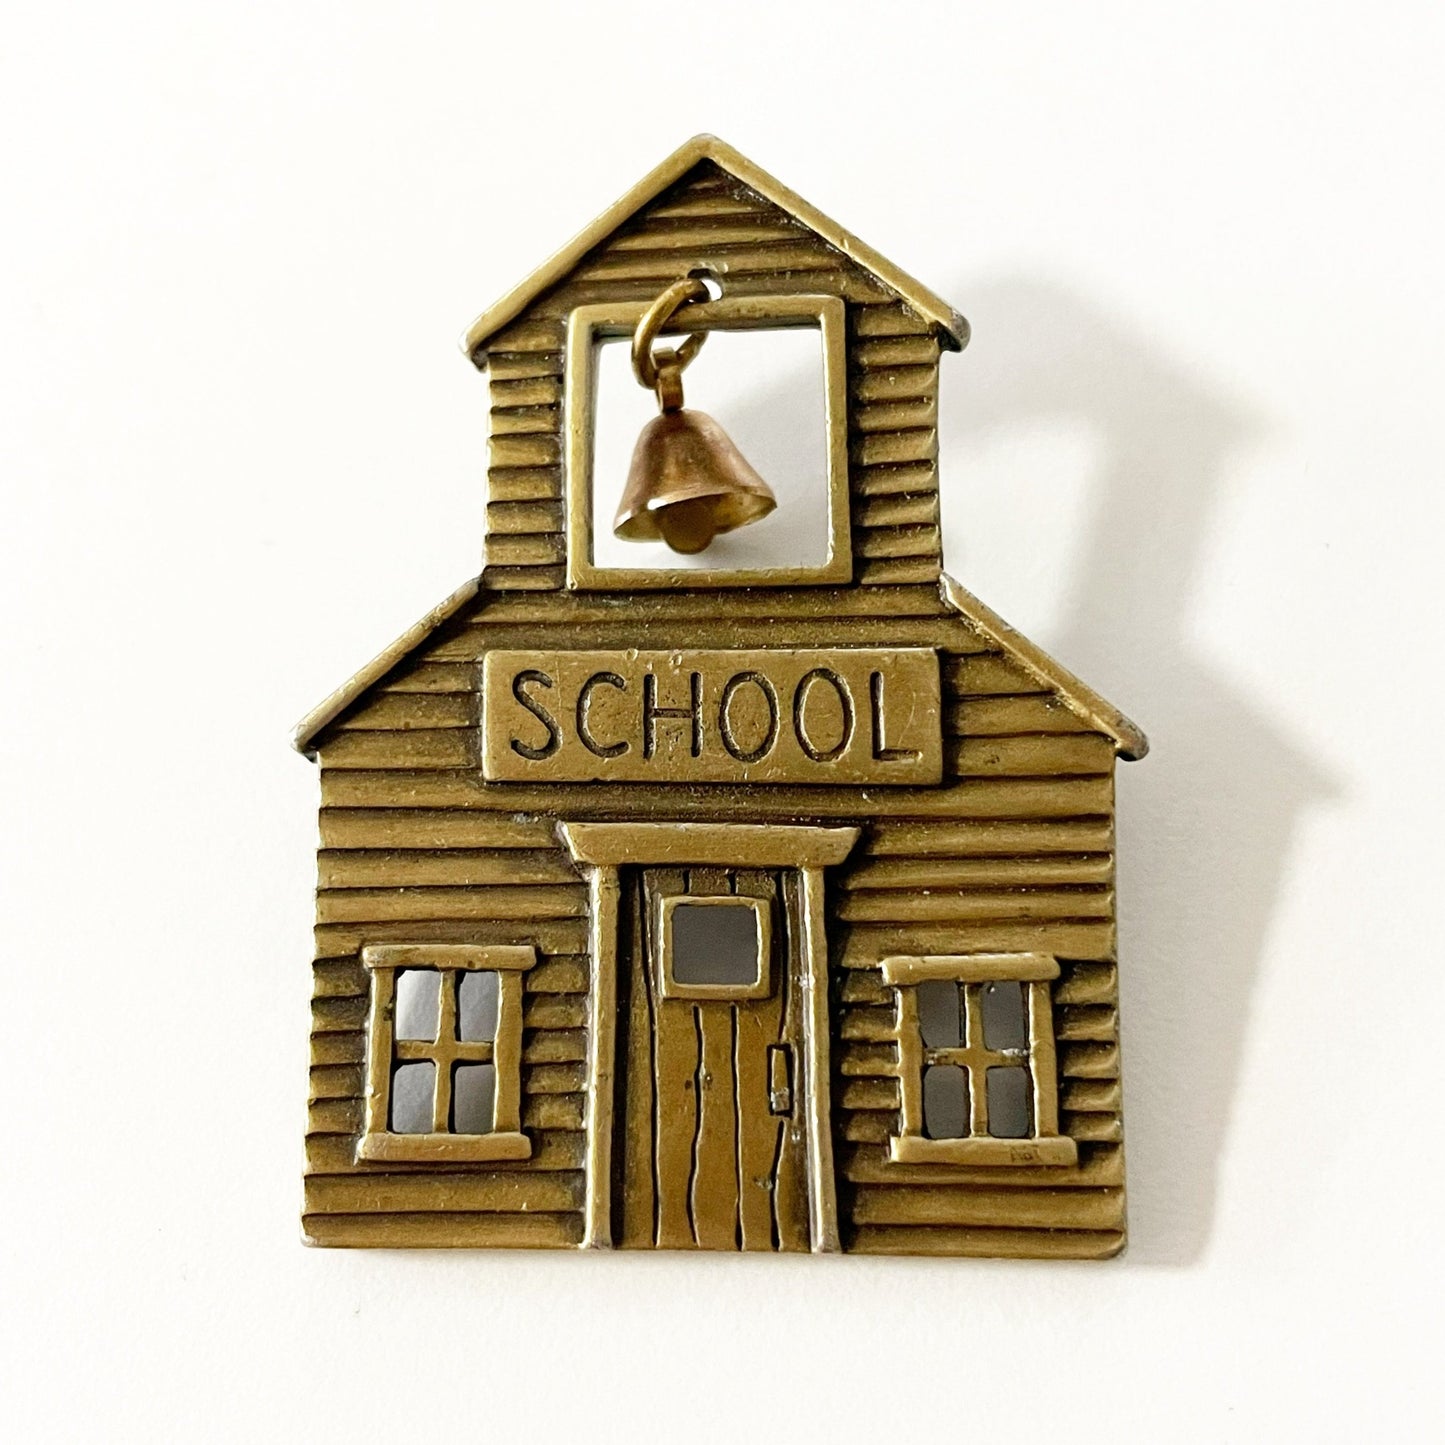 Vintage JJ signed brass tone school brooch with a dangling bell